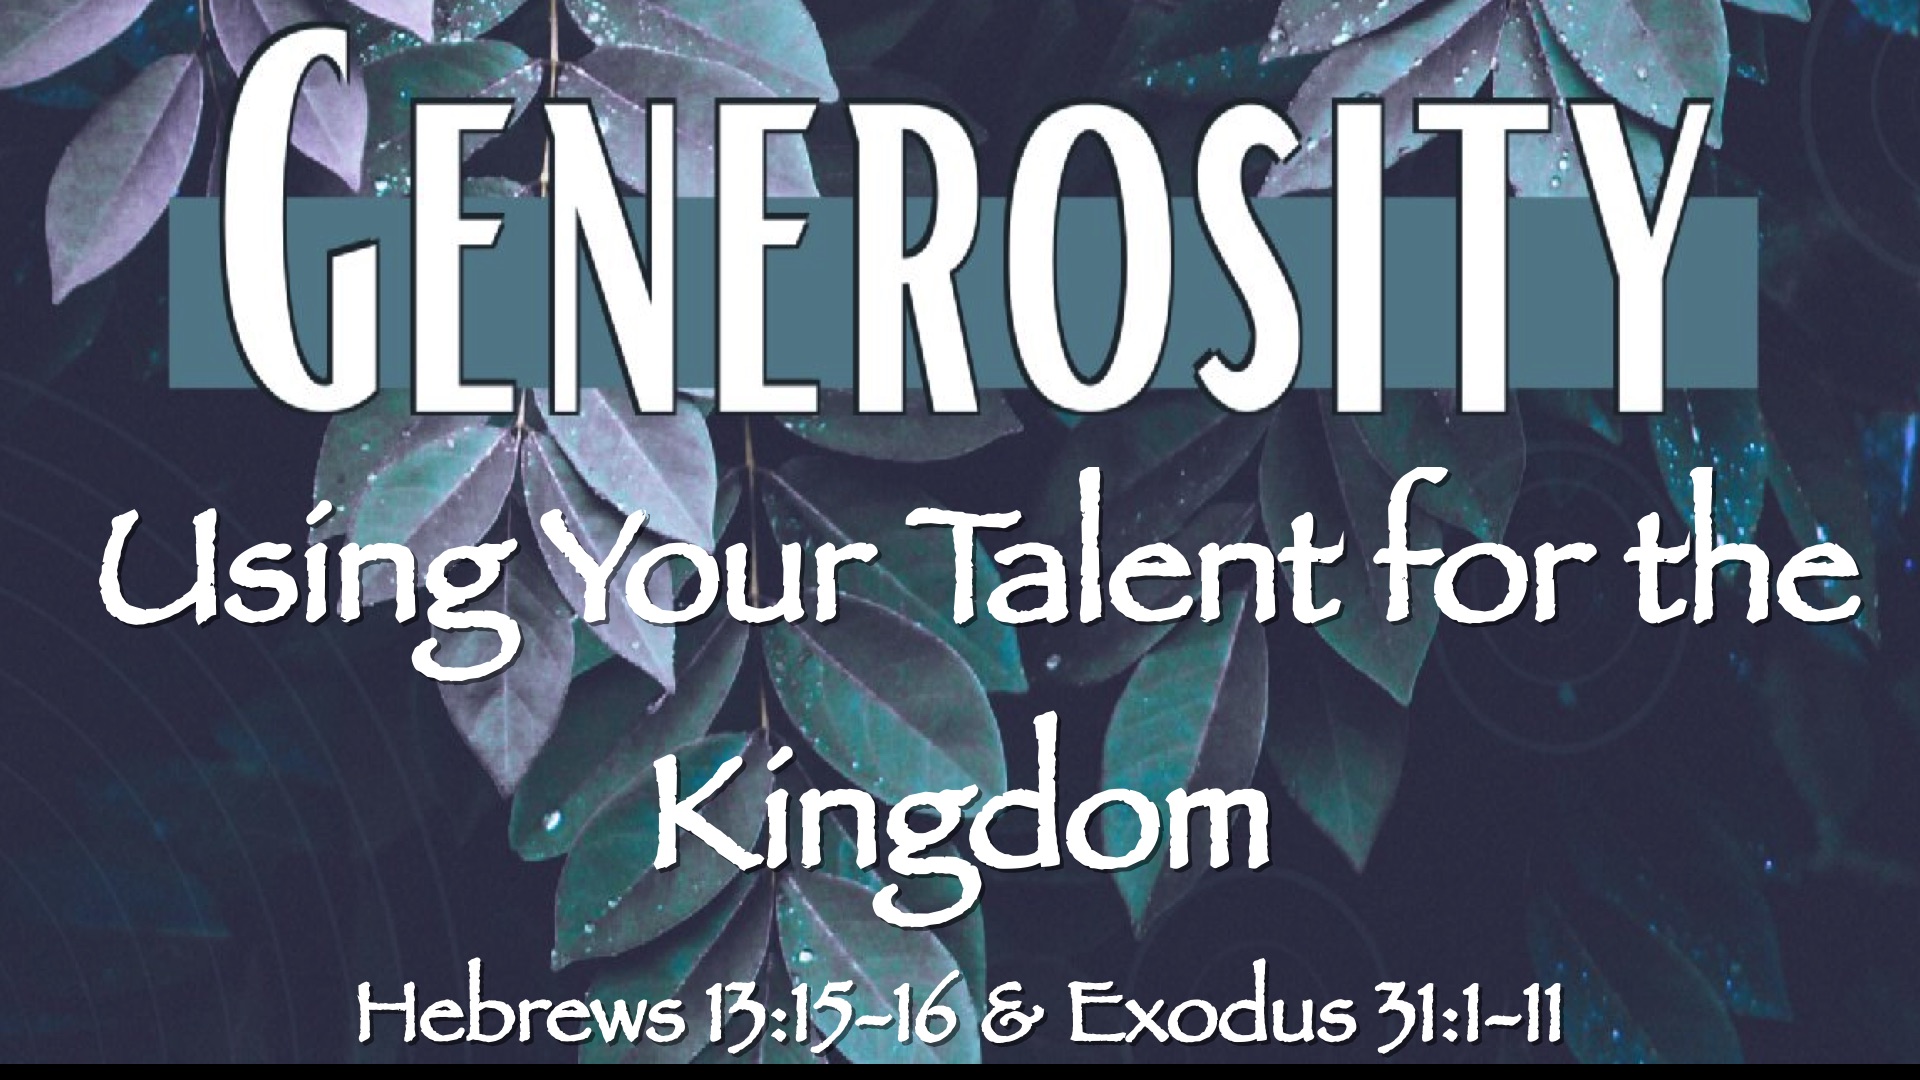 “Generosity – Using Your Talent for the Kingdom”